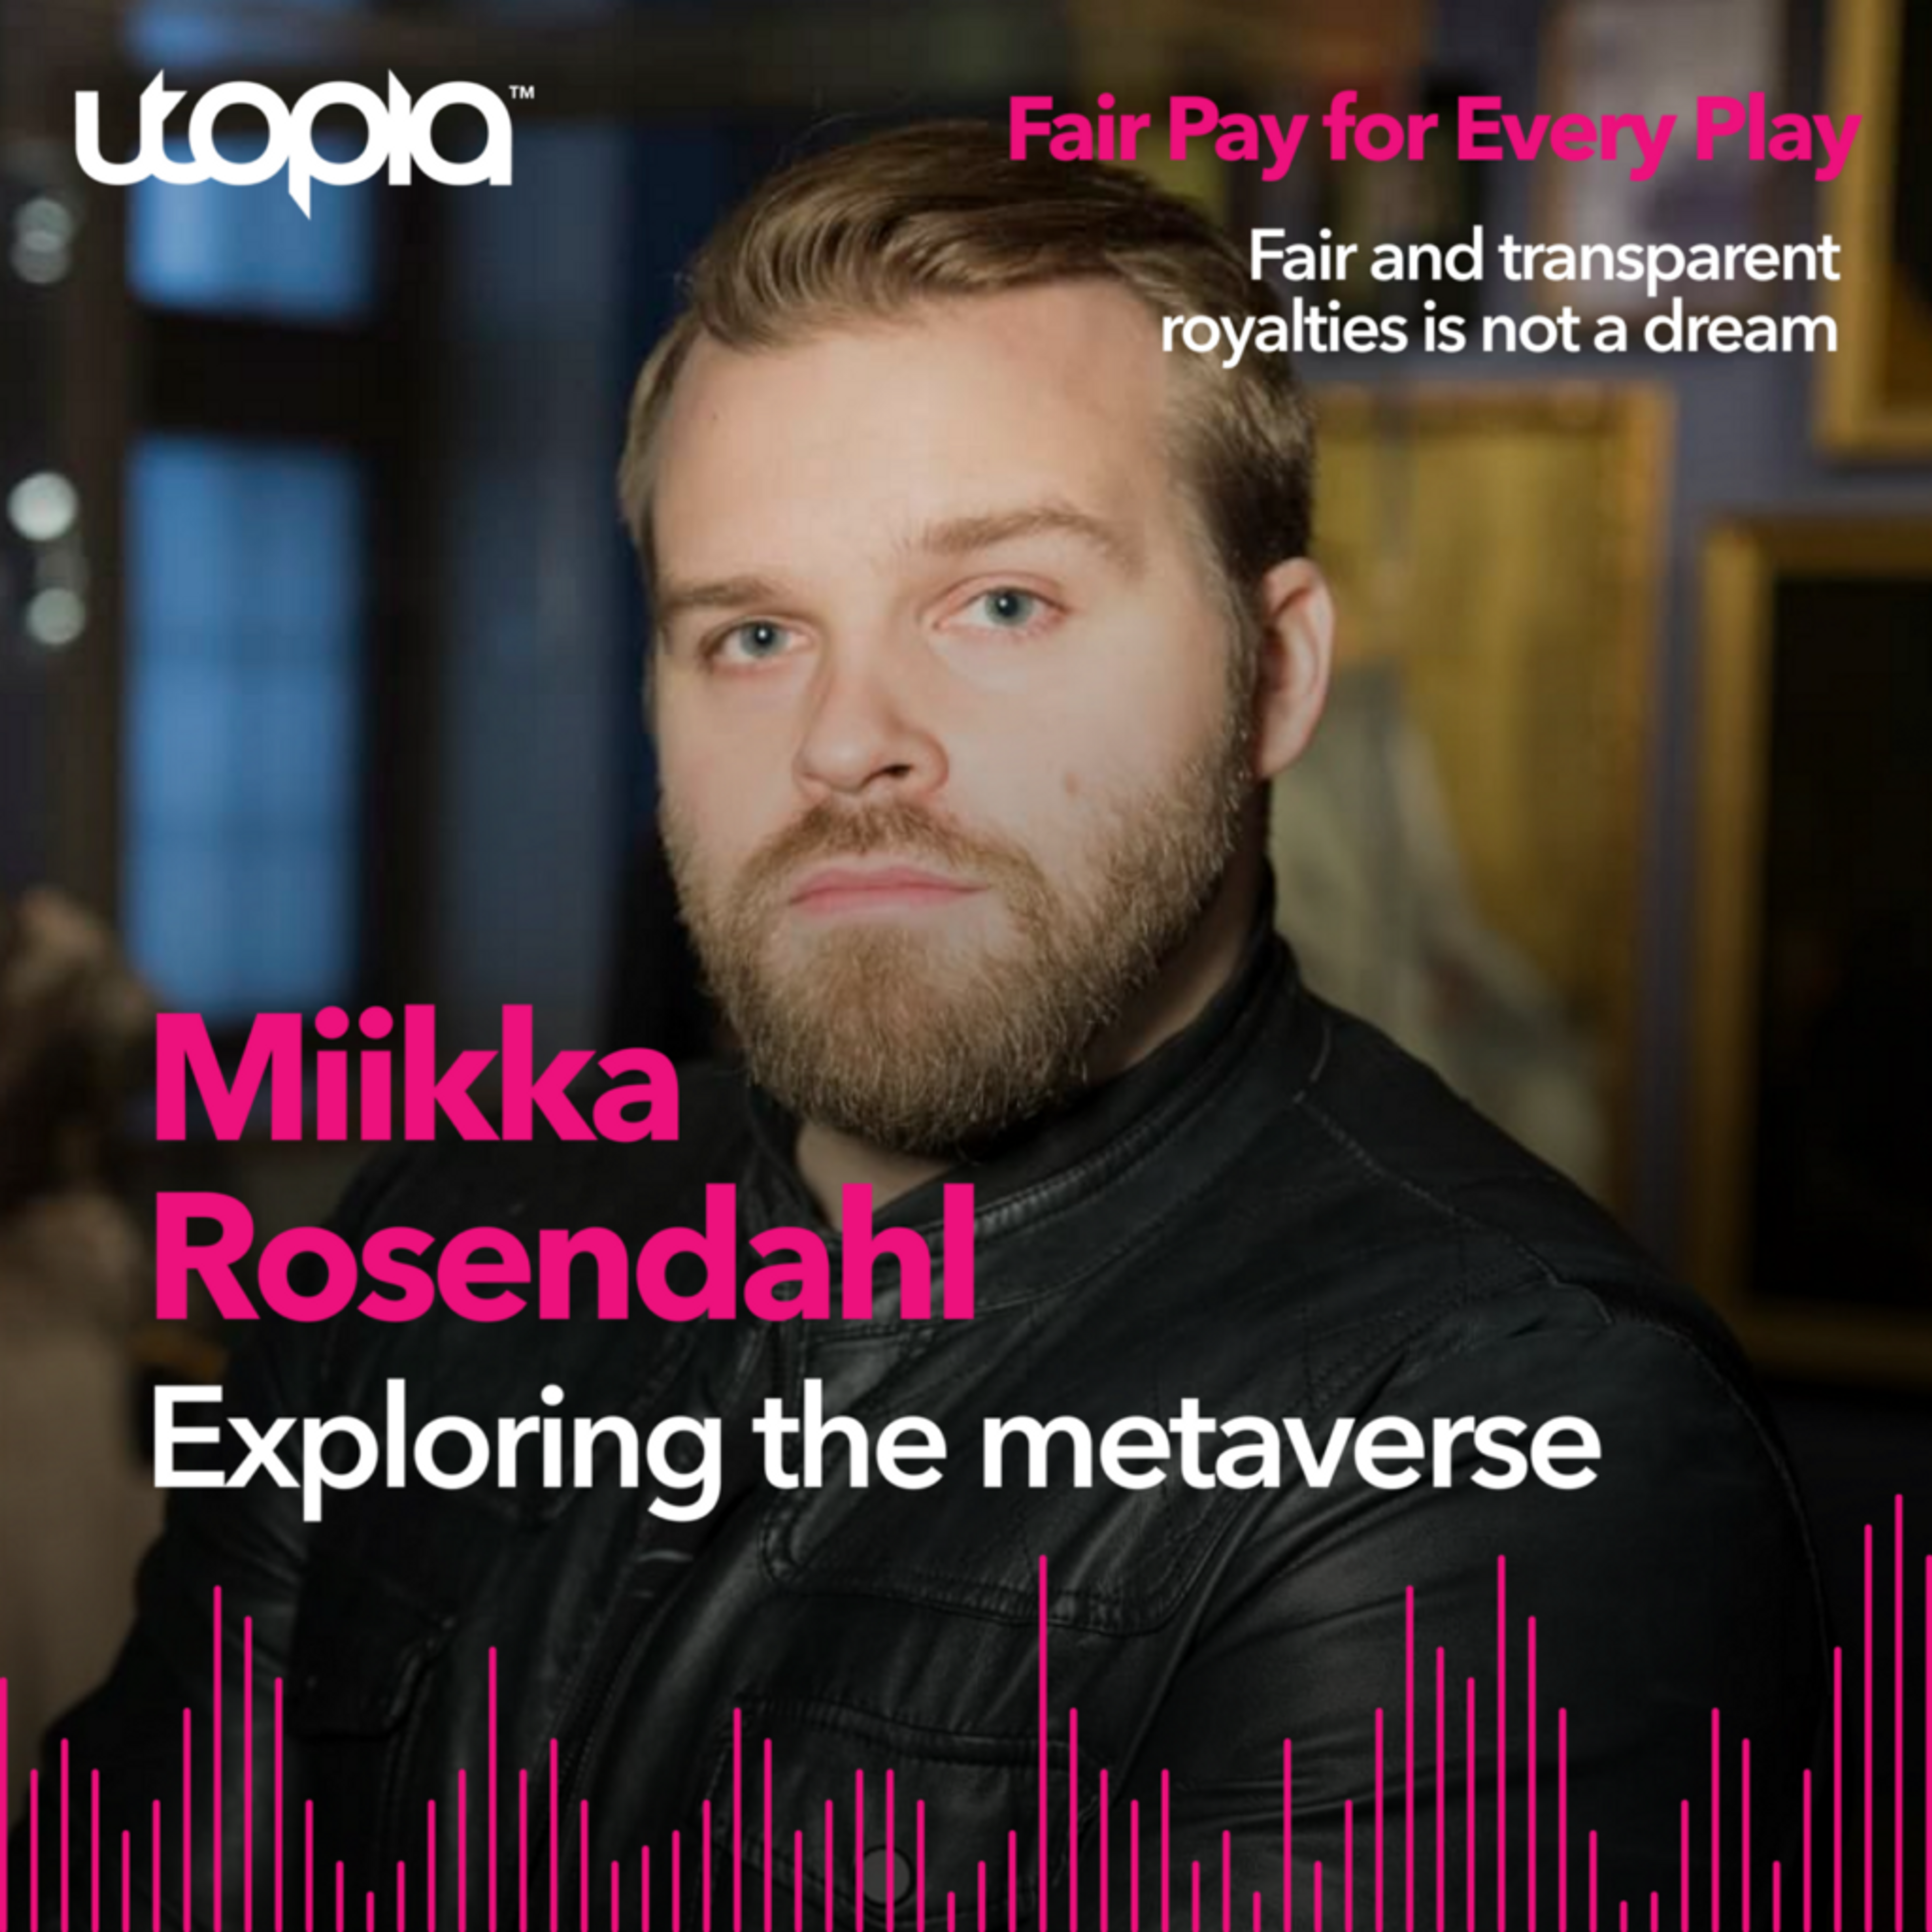 Card image for Fair Pay for Every Play, Ep 17: Exploring the metaverse with Miikka Rosendahl